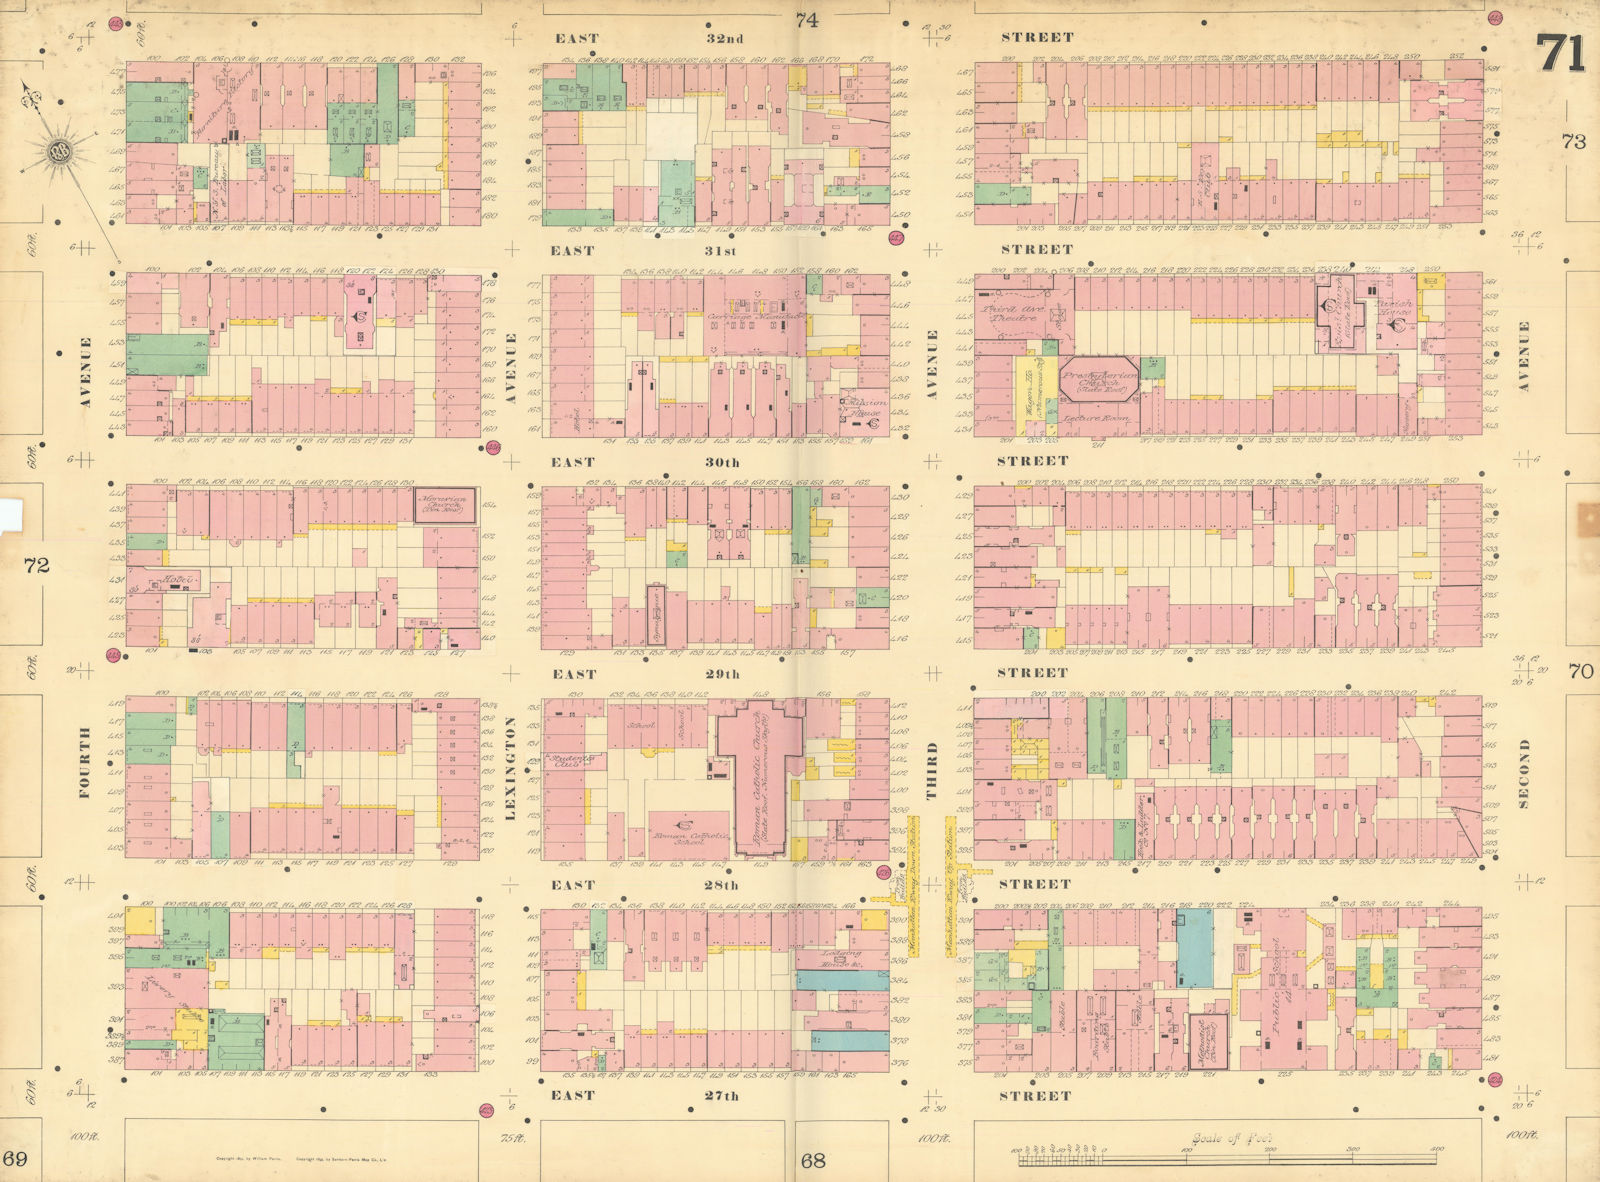 Associate Product Sanborn NYC #71 Manhattan Midtown NoMad Kips Bay Rose Hill Murray Hill 1899 map